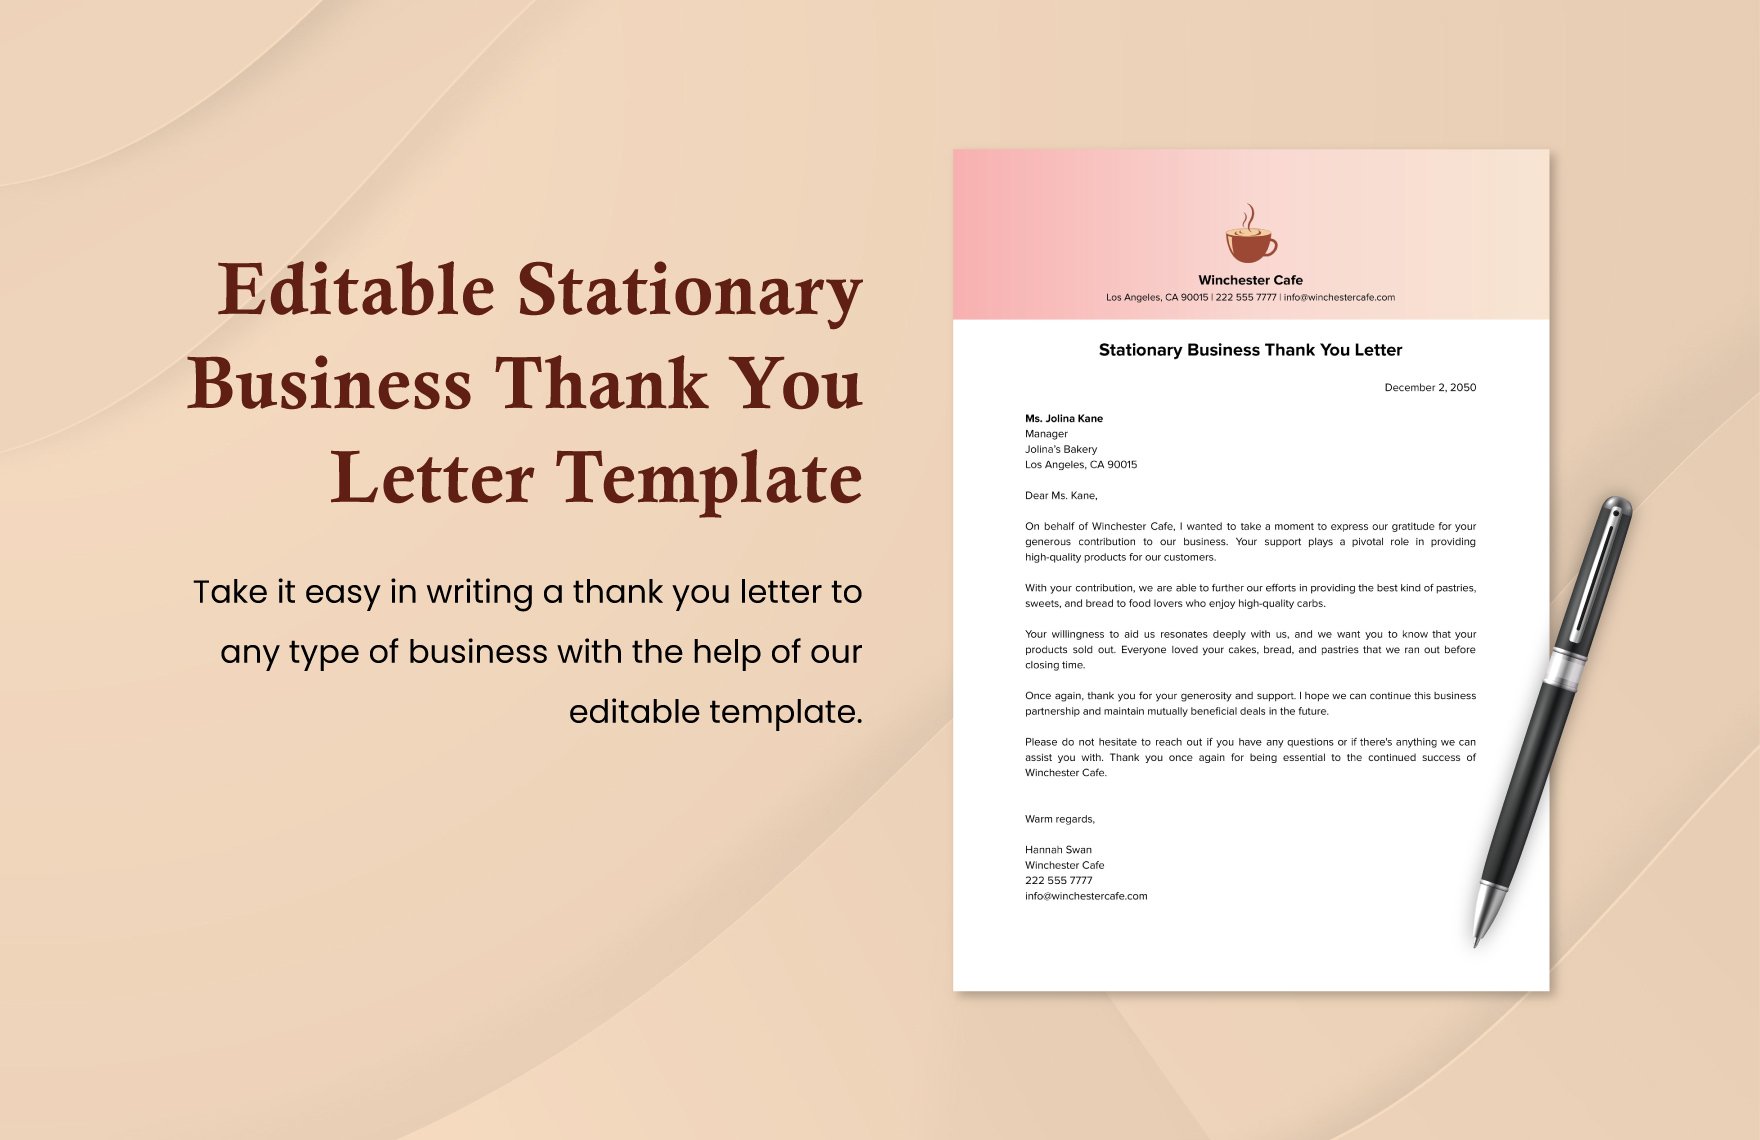 editable-stationary-business-thank-you-letter